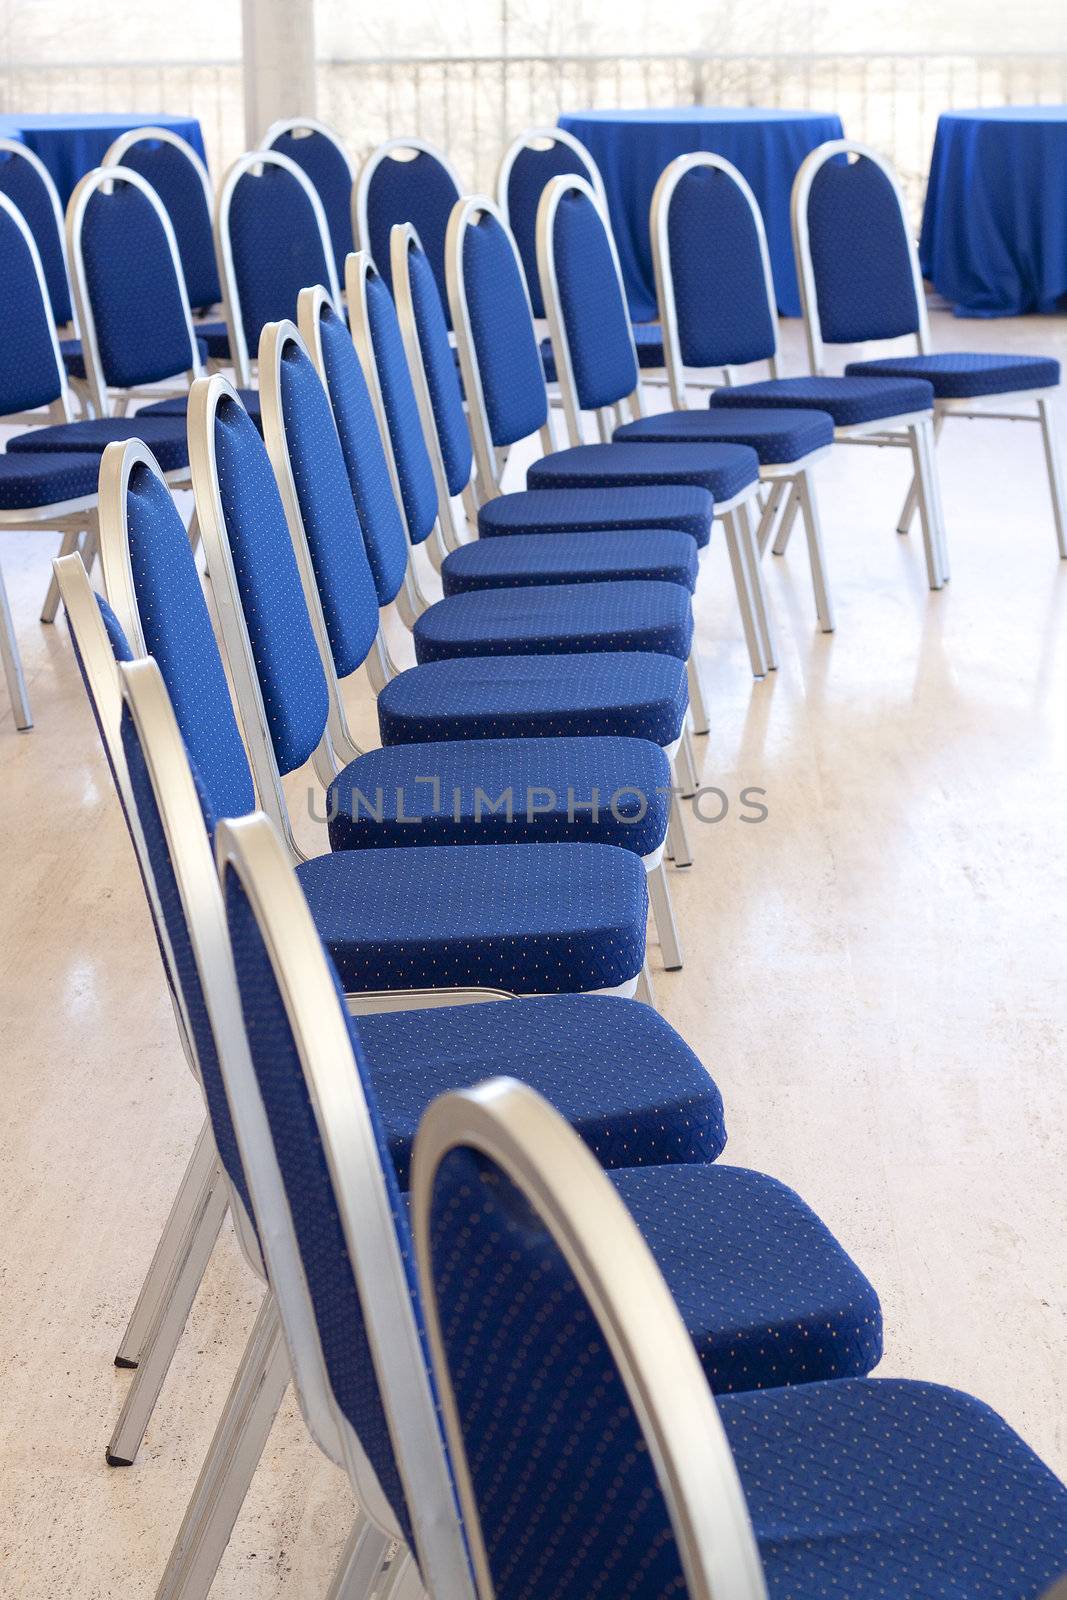 Curved row of empty conference chairs